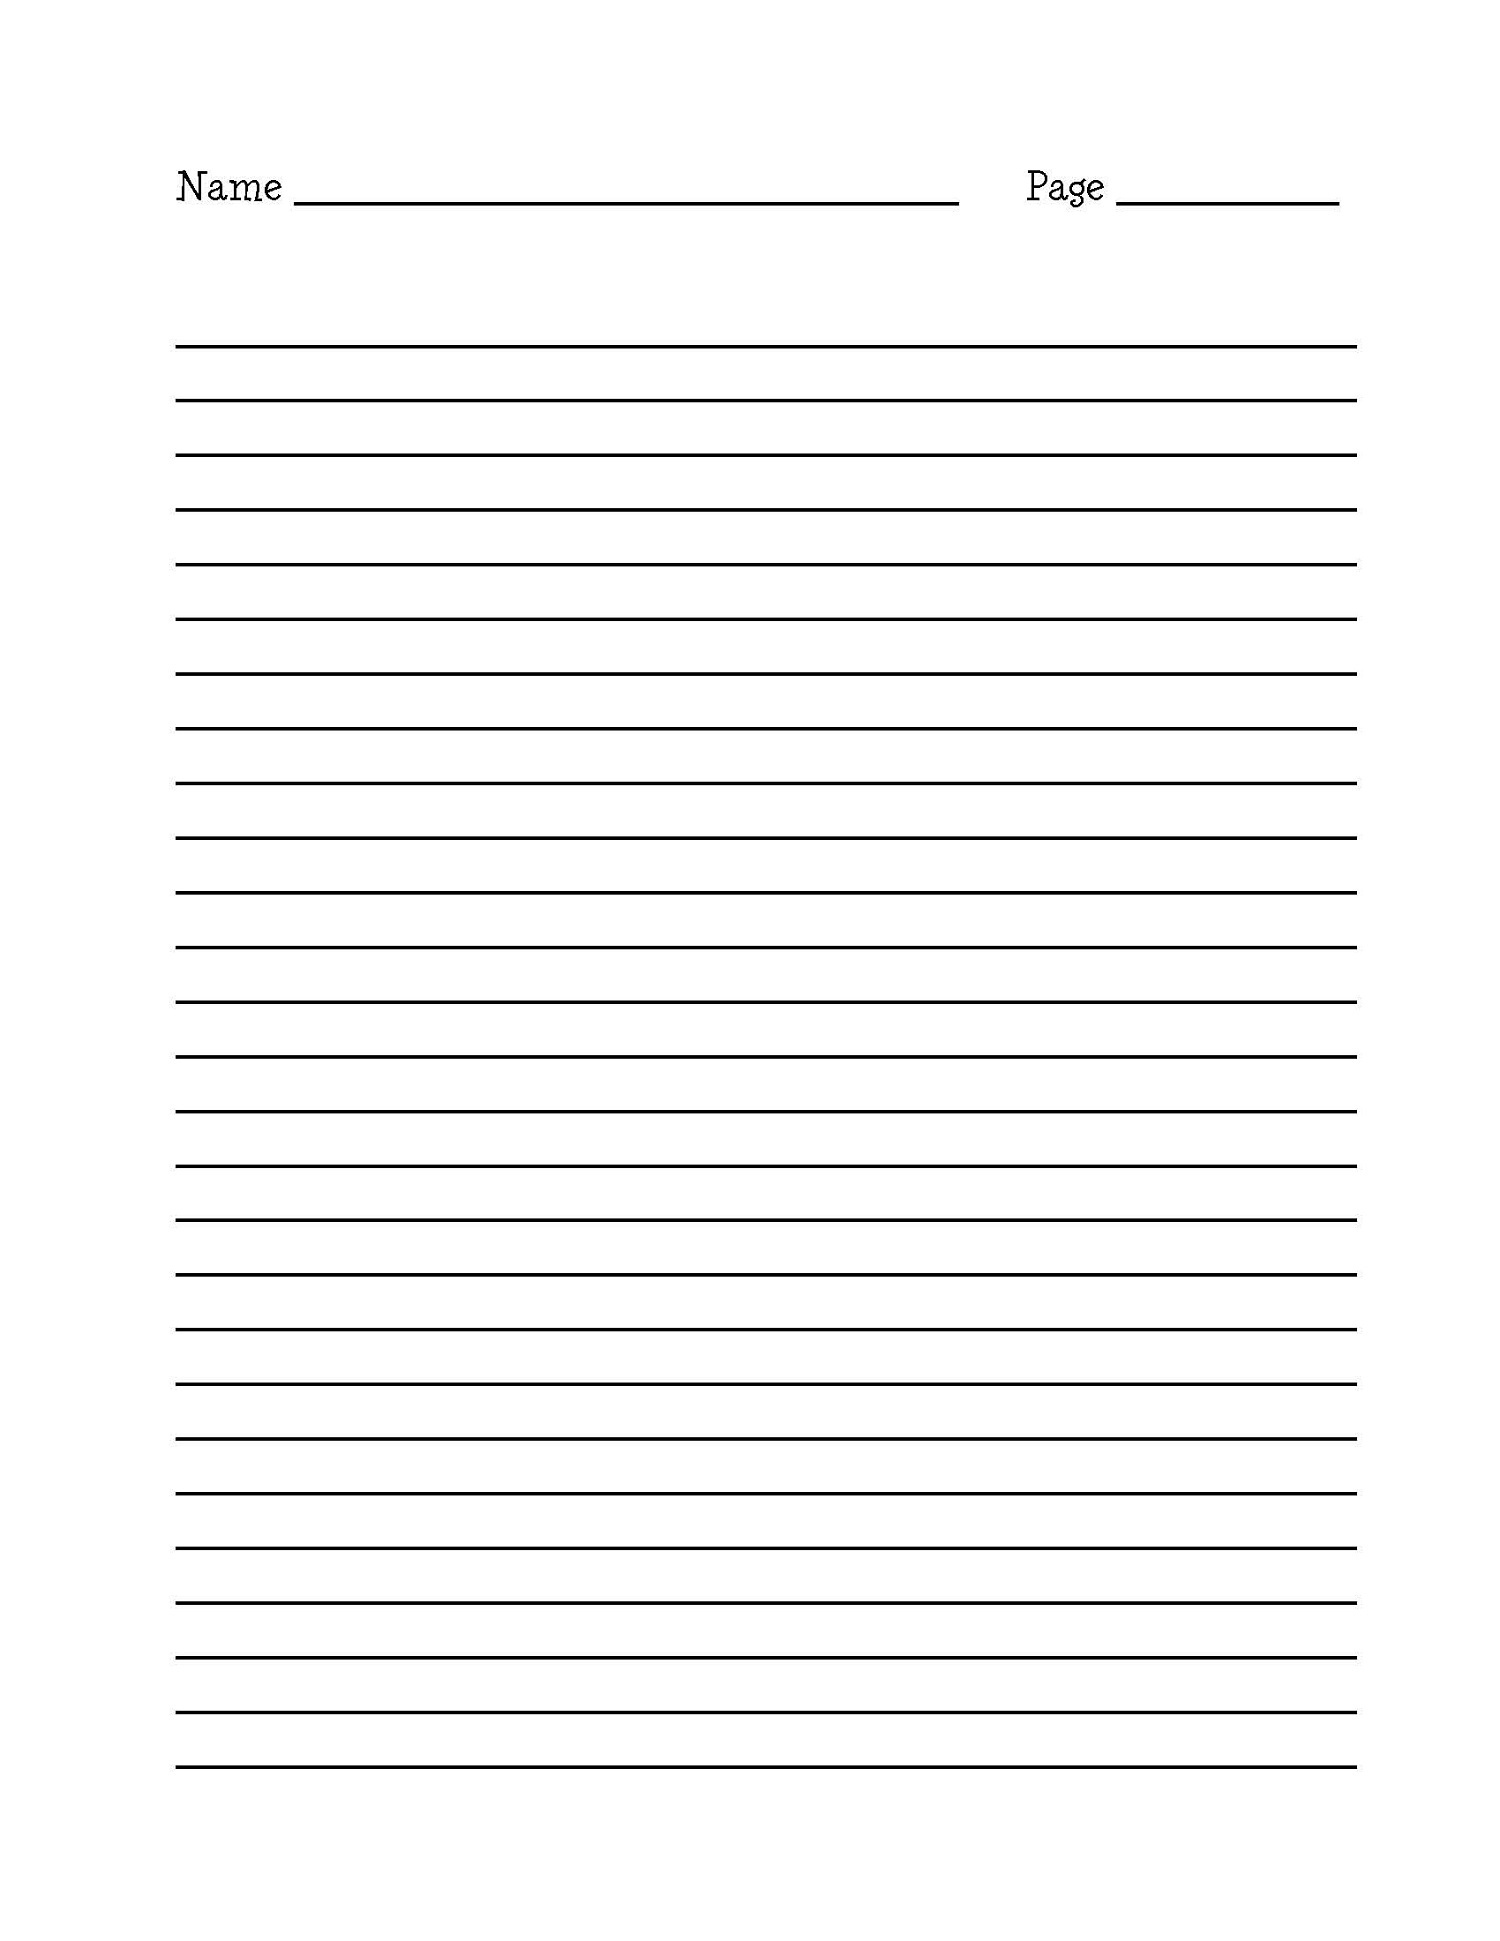 Printable Writing Paper With Border - Floss Papers - Free Printable Writing Paper With Borders